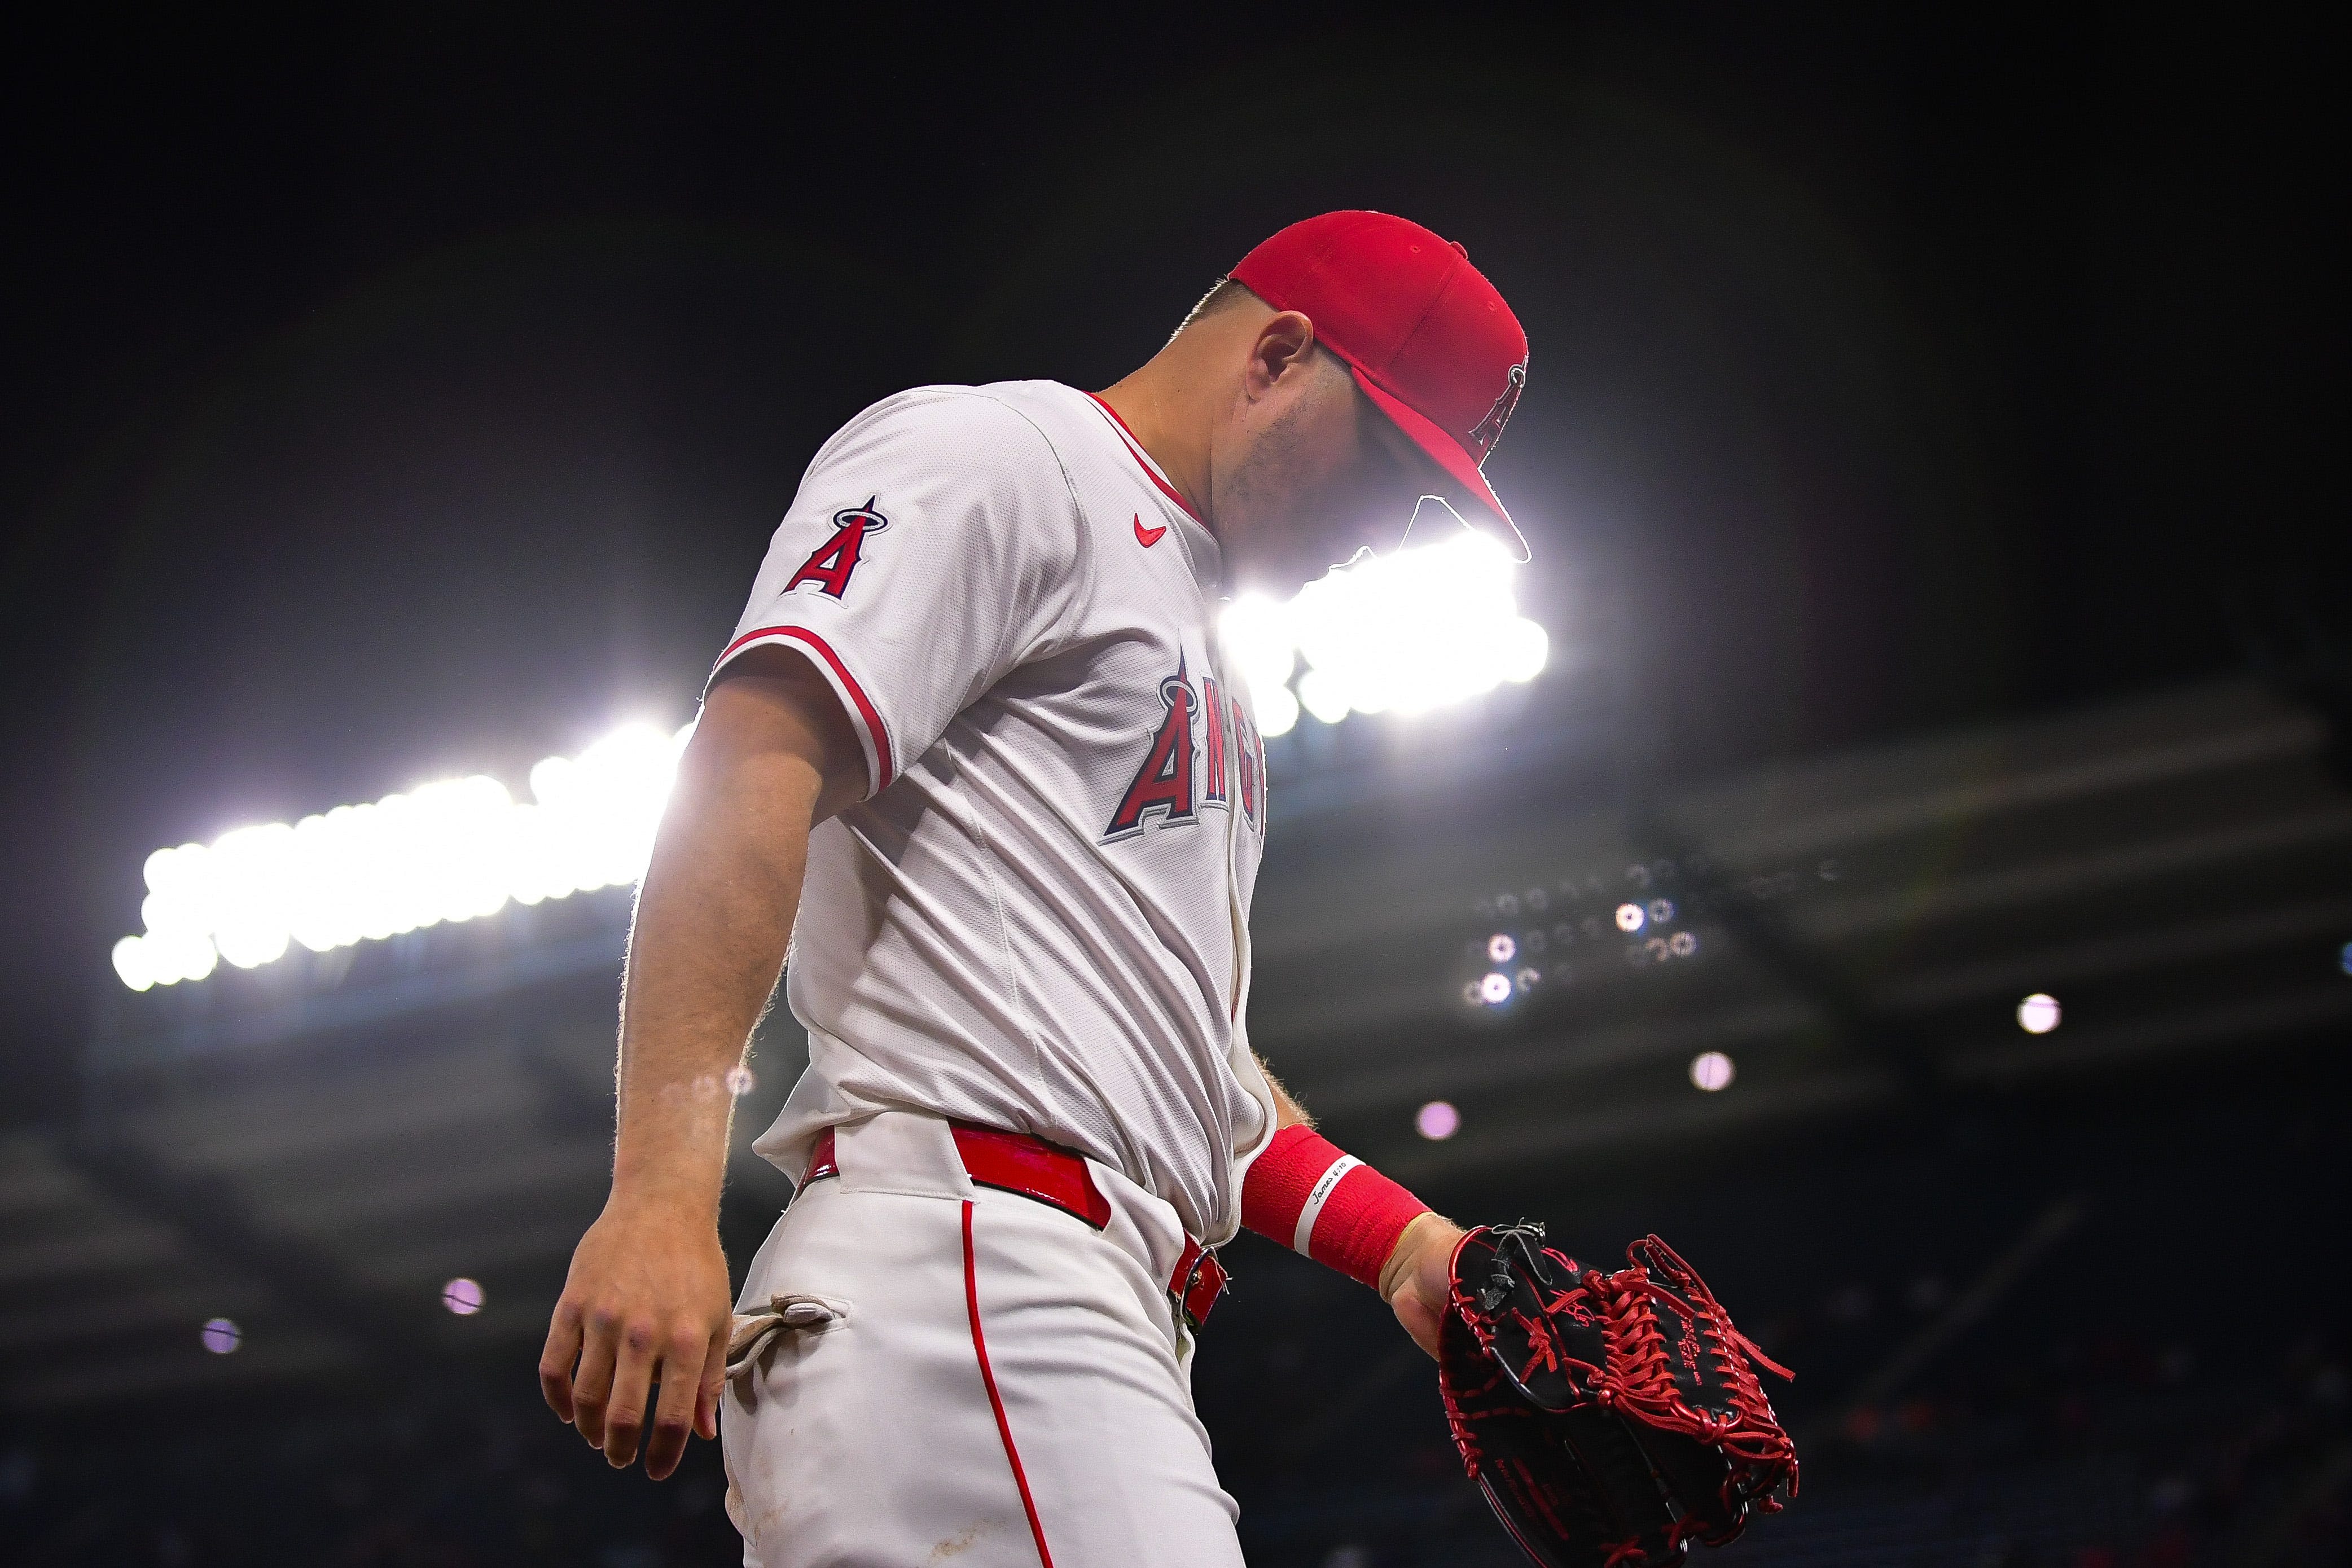 Mike Trout's GOAT path halted by injuries. Ken Griffey Jr. feels the Angels star's pain.